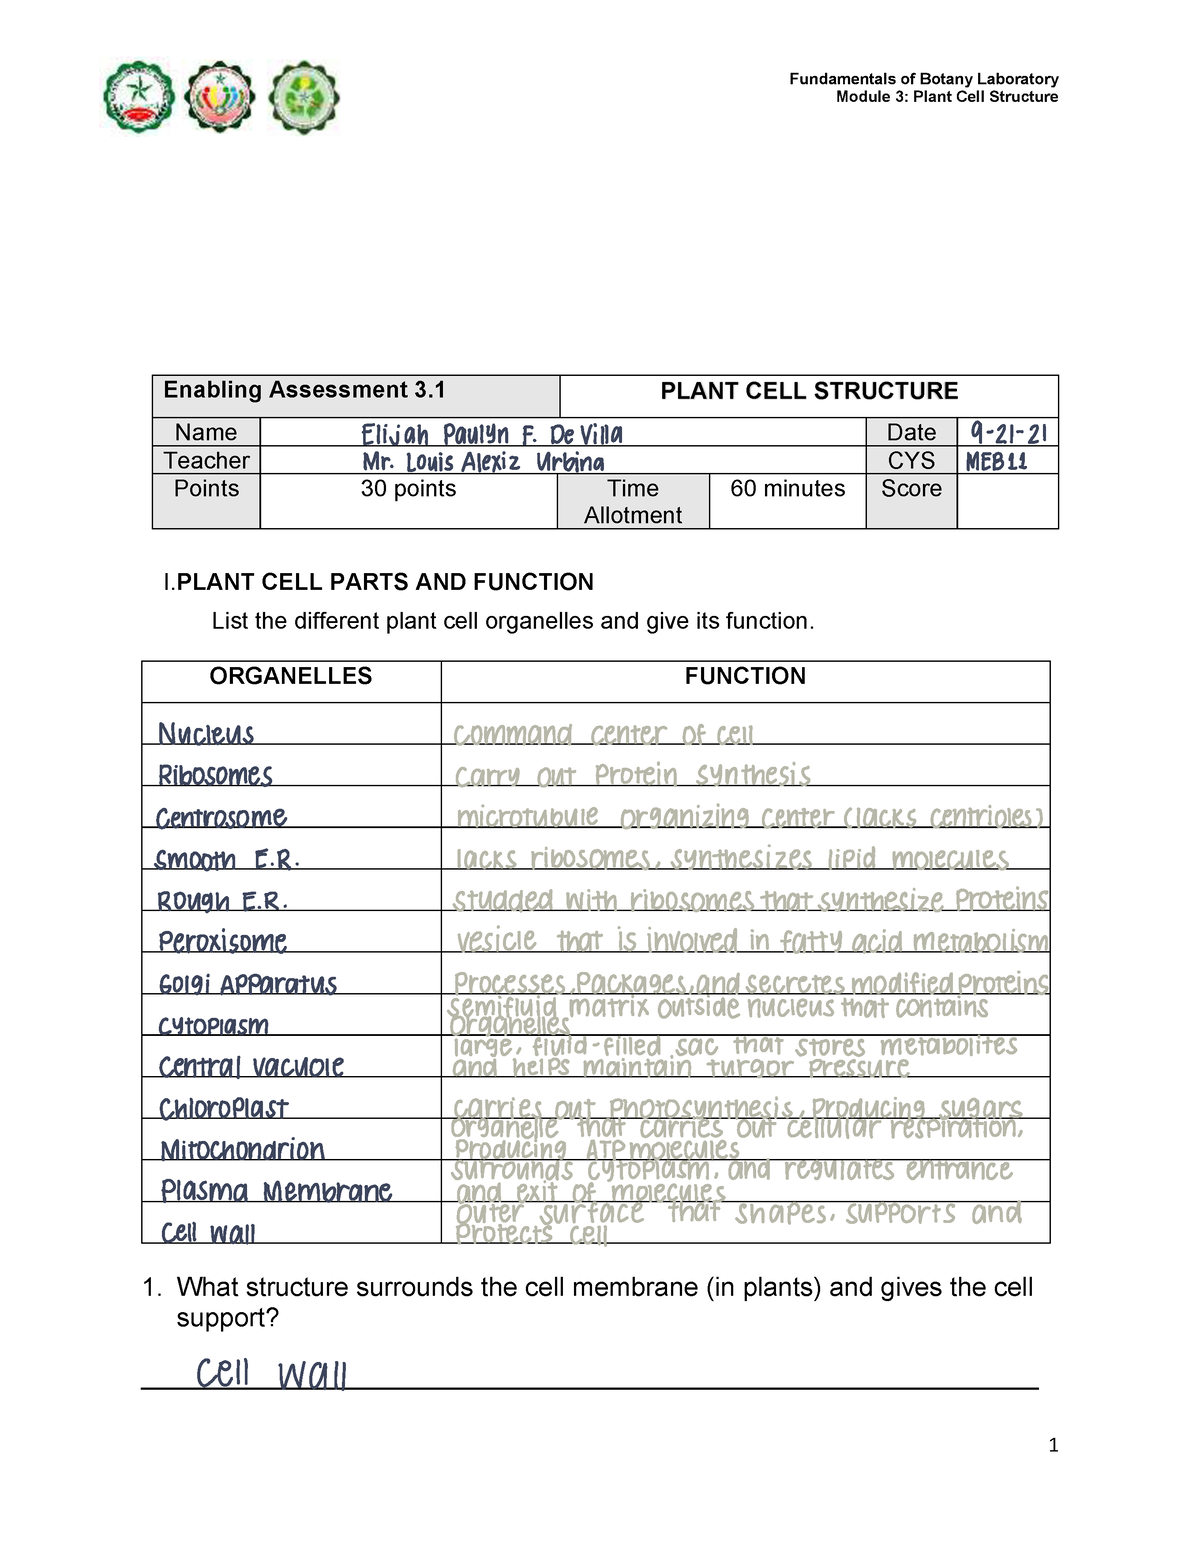 plant cell parts and functions list